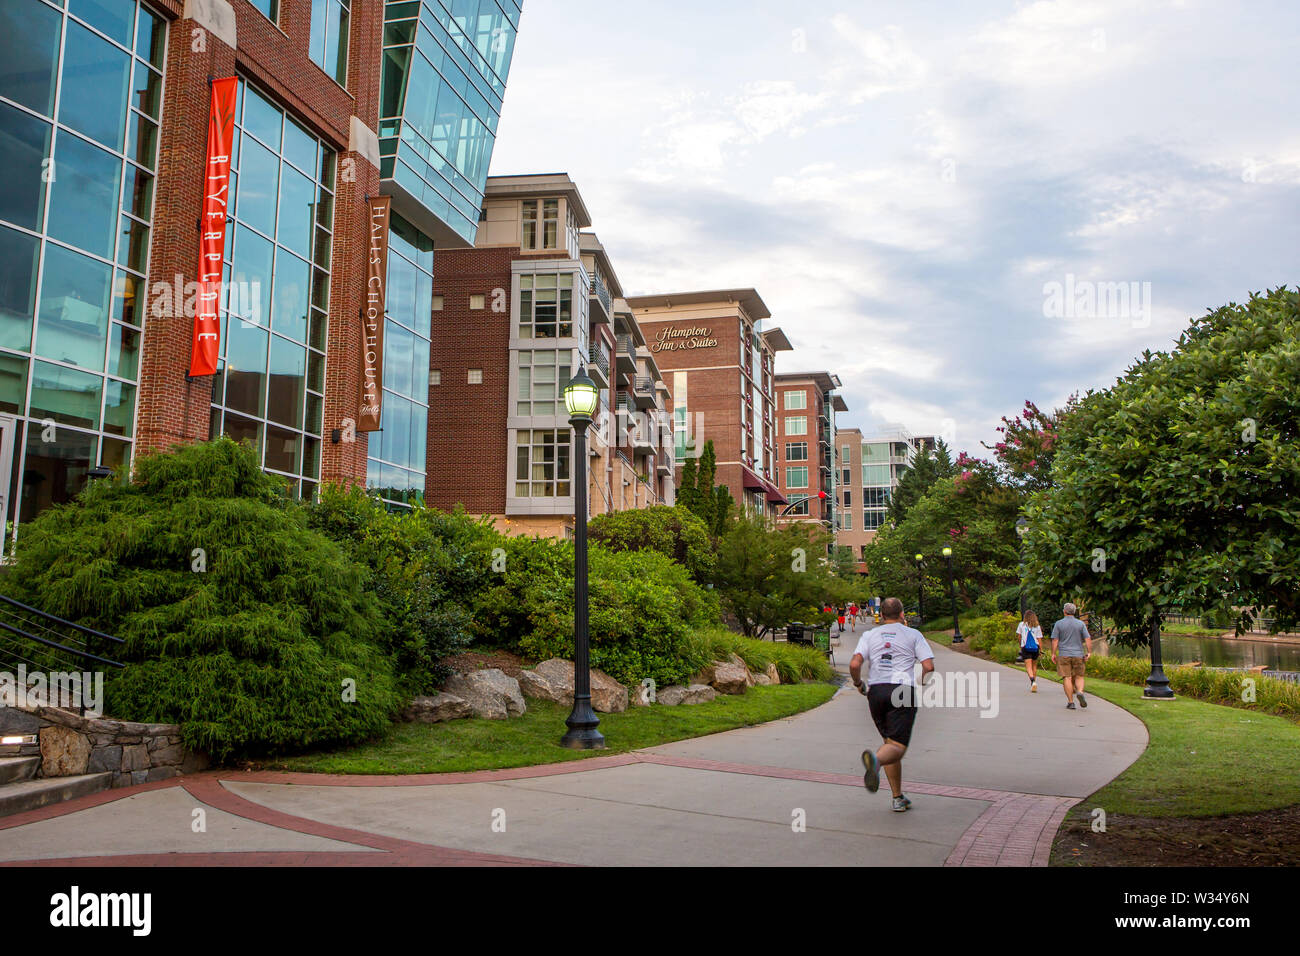 GREENVILLE, SC (USA) - July 5, 2019: A view of the downtown River Walk along the Reedy River and the River Place development of shops and restaurants. Stock Photo